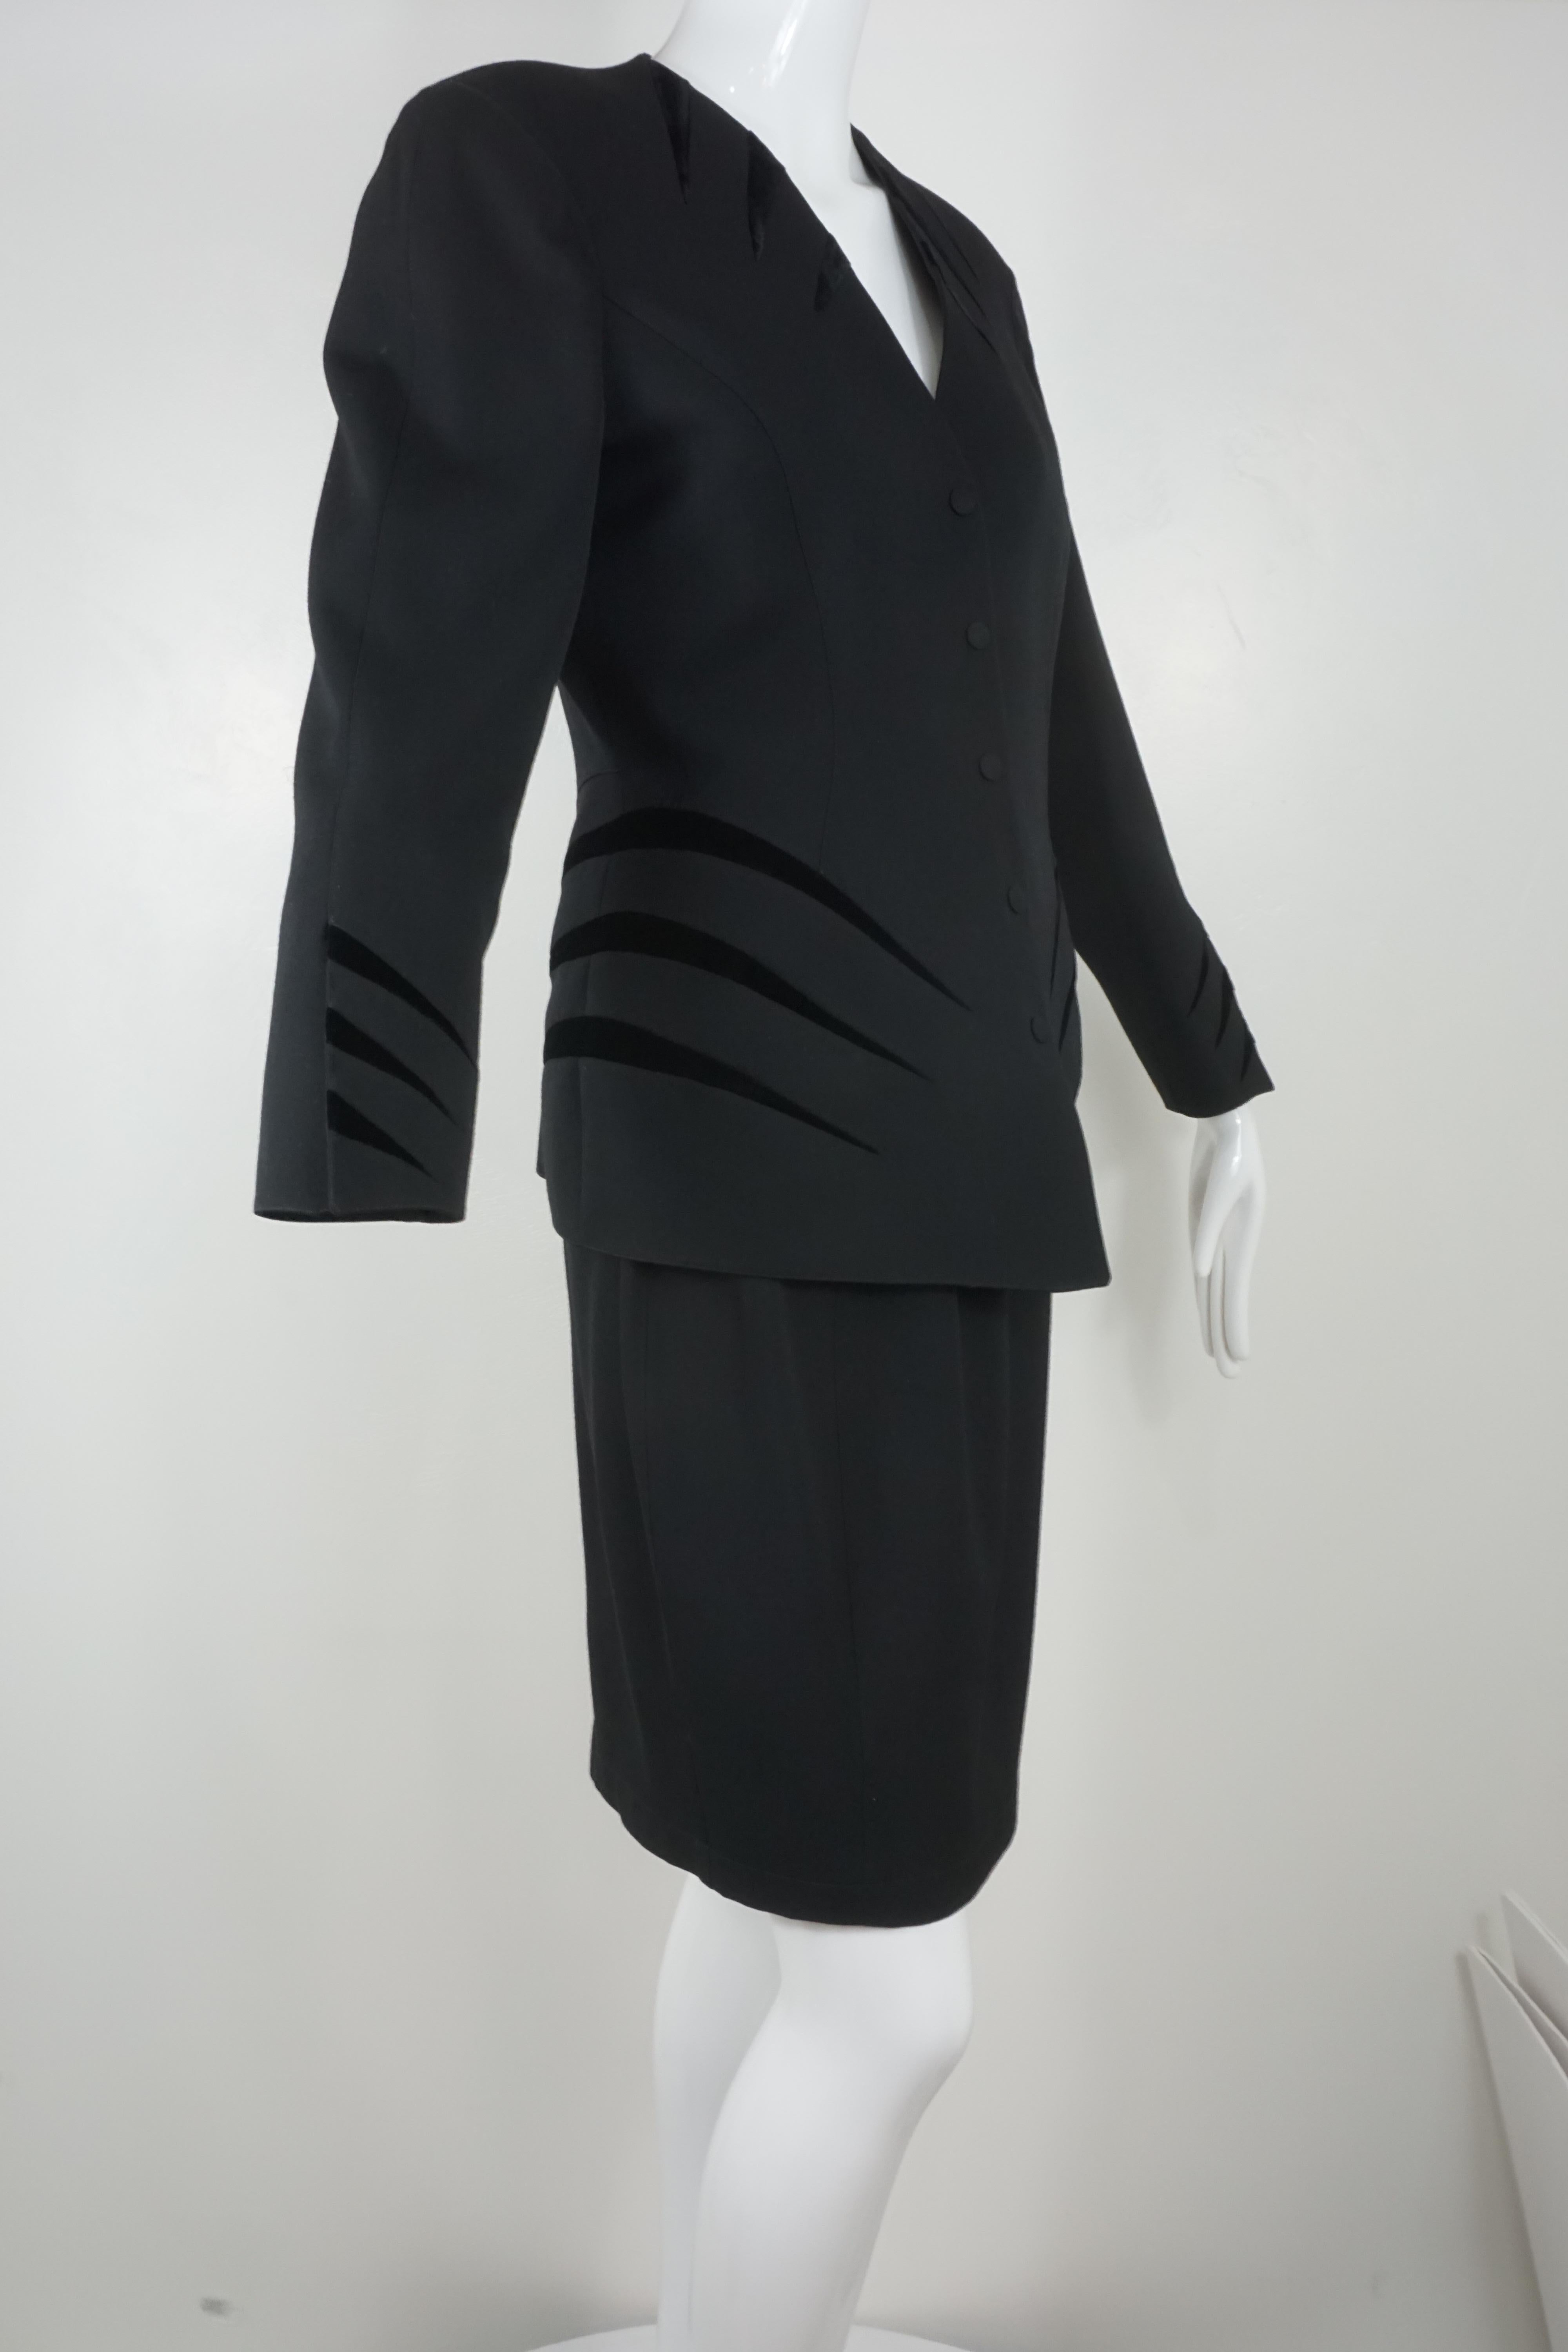 Thierry Mugler vintage suit from the 1990's in black wool with black velvet detailing to accentuate the nipped waist and hourglass figure. Jacket showcases black velvet detailing at the collar, hips and cuffs with a v-cut neckline and five snap